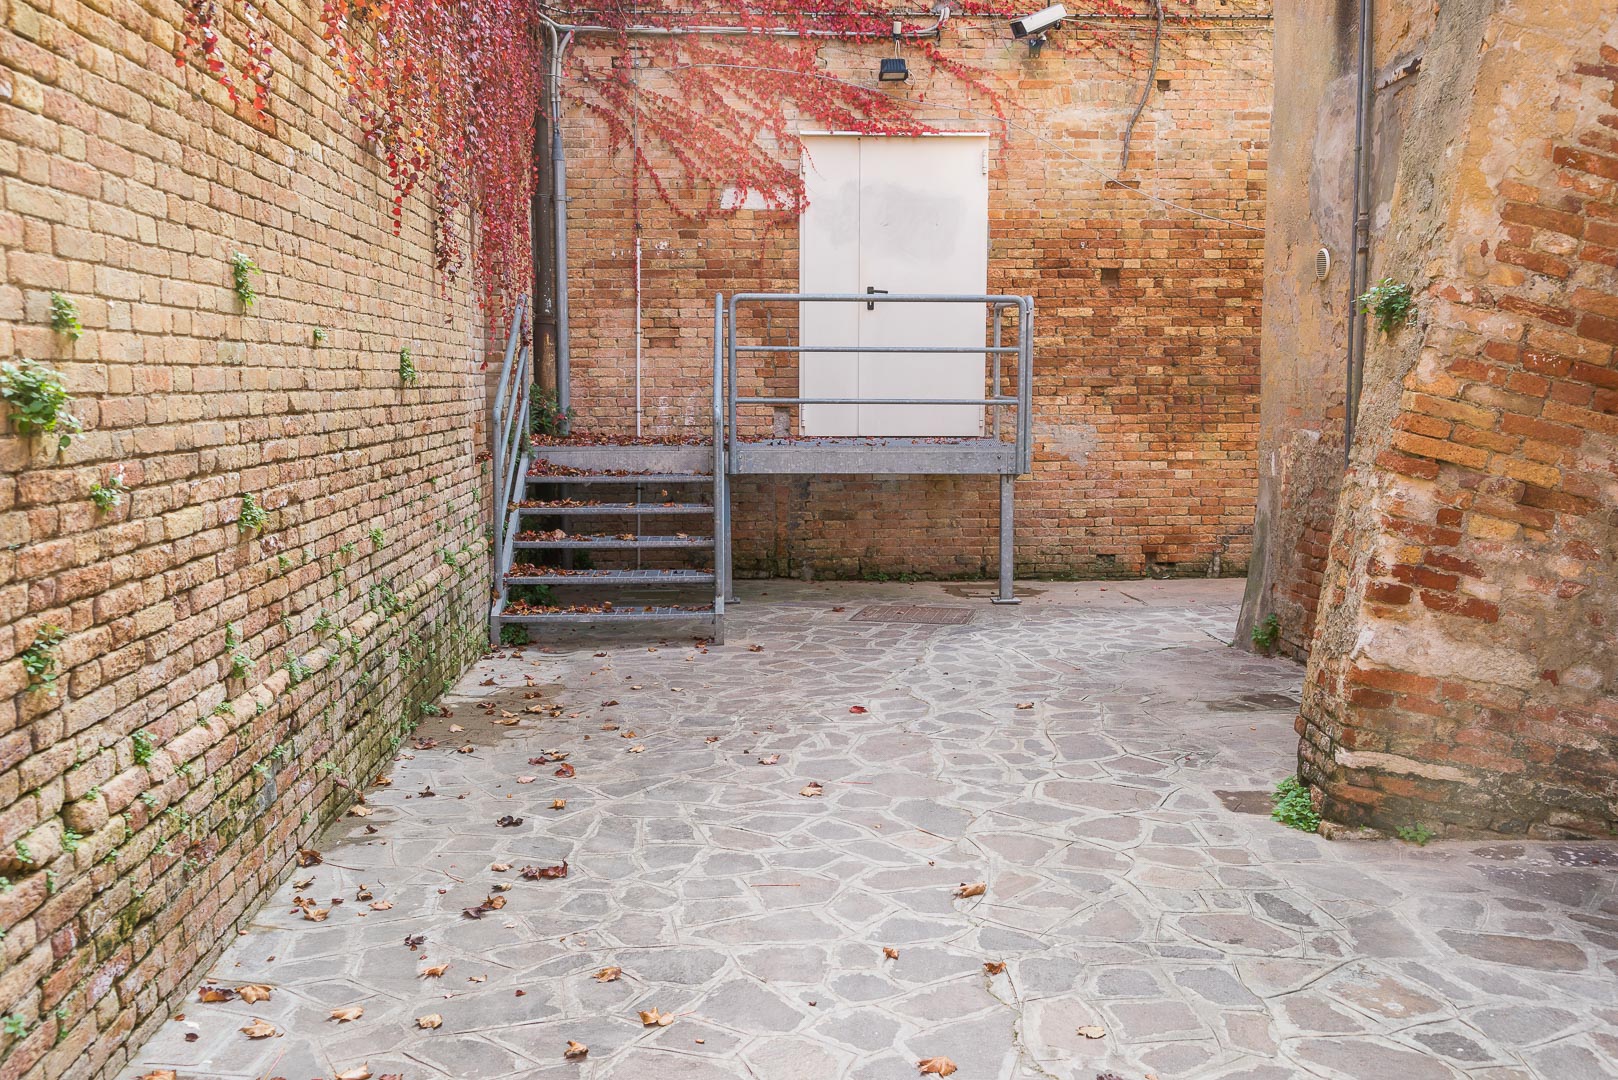 Backplate • ID: 6130 • HDRI Haven - Street With Brick Wall Covered With Leaves